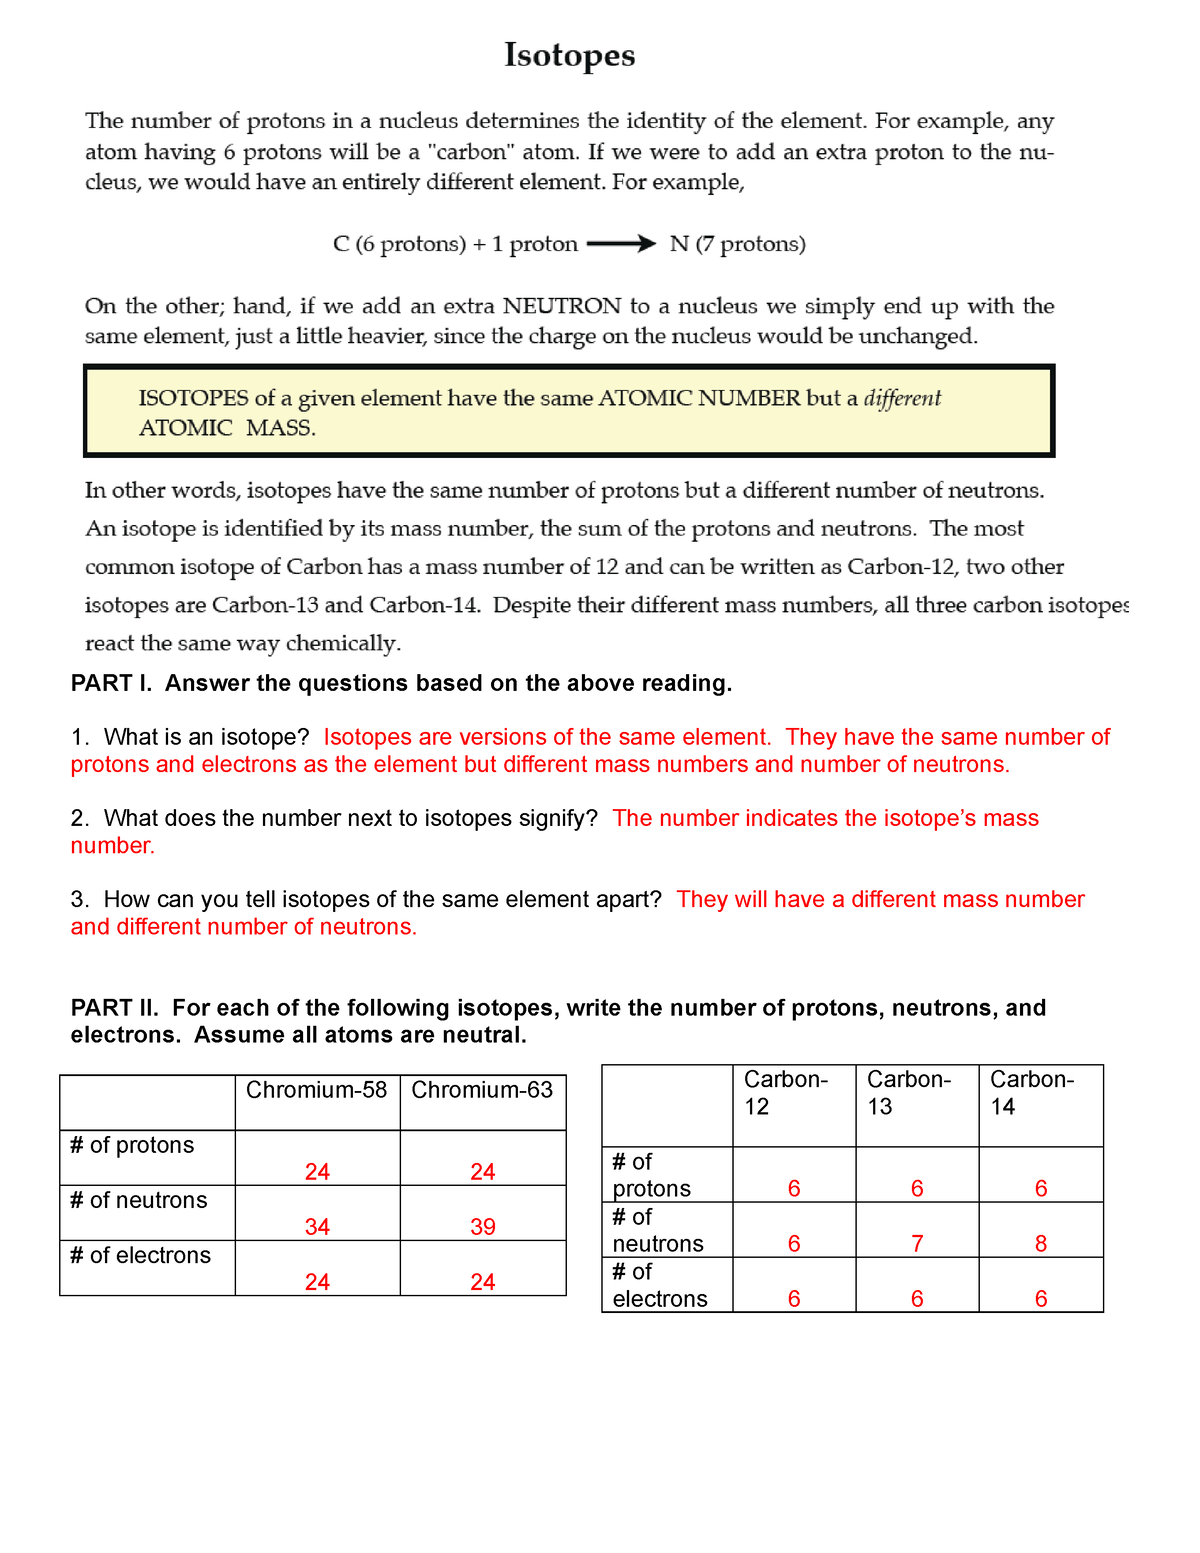 isotopes-worksheet-answer-key-part-i-answer-the-questions-based-on-the-above-reading-what-is